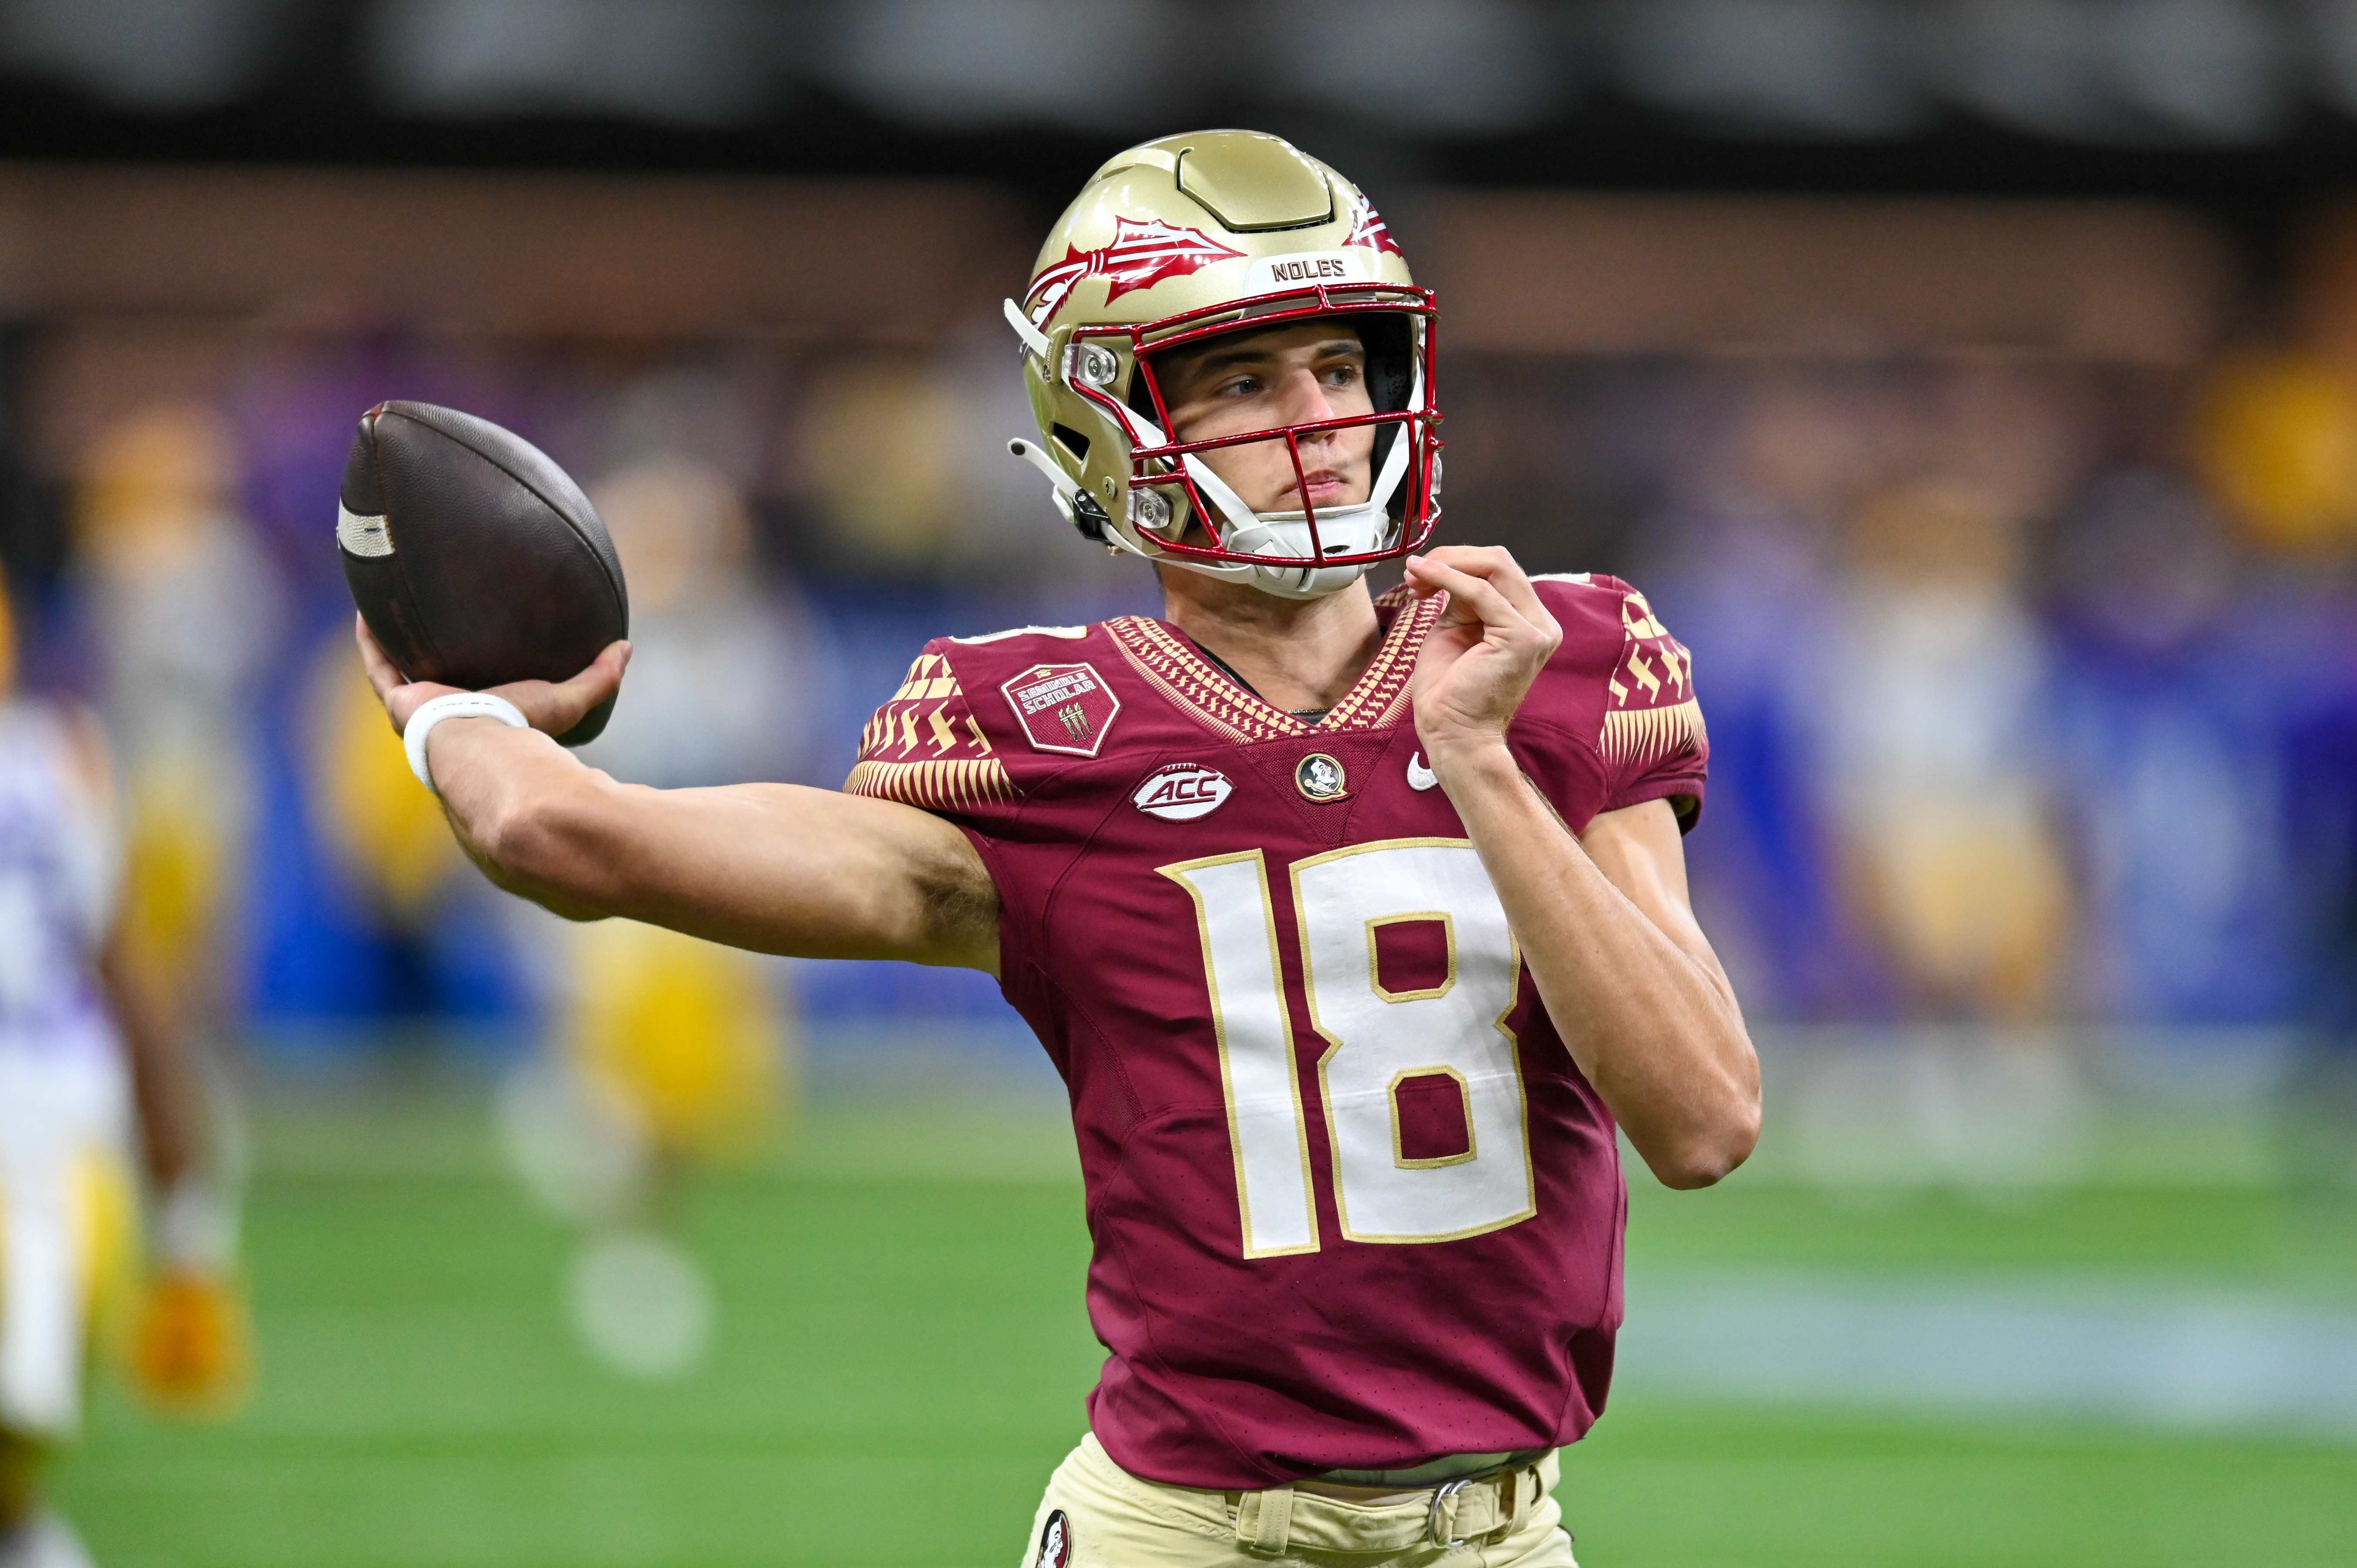 Florida State quarterback Tate Rodemaker (18) in action during the Allstate Louisiana Kickoff game between the Florida State Seminoles and the LSU Tigers at Caesars Superdome in New Orleans, LA.